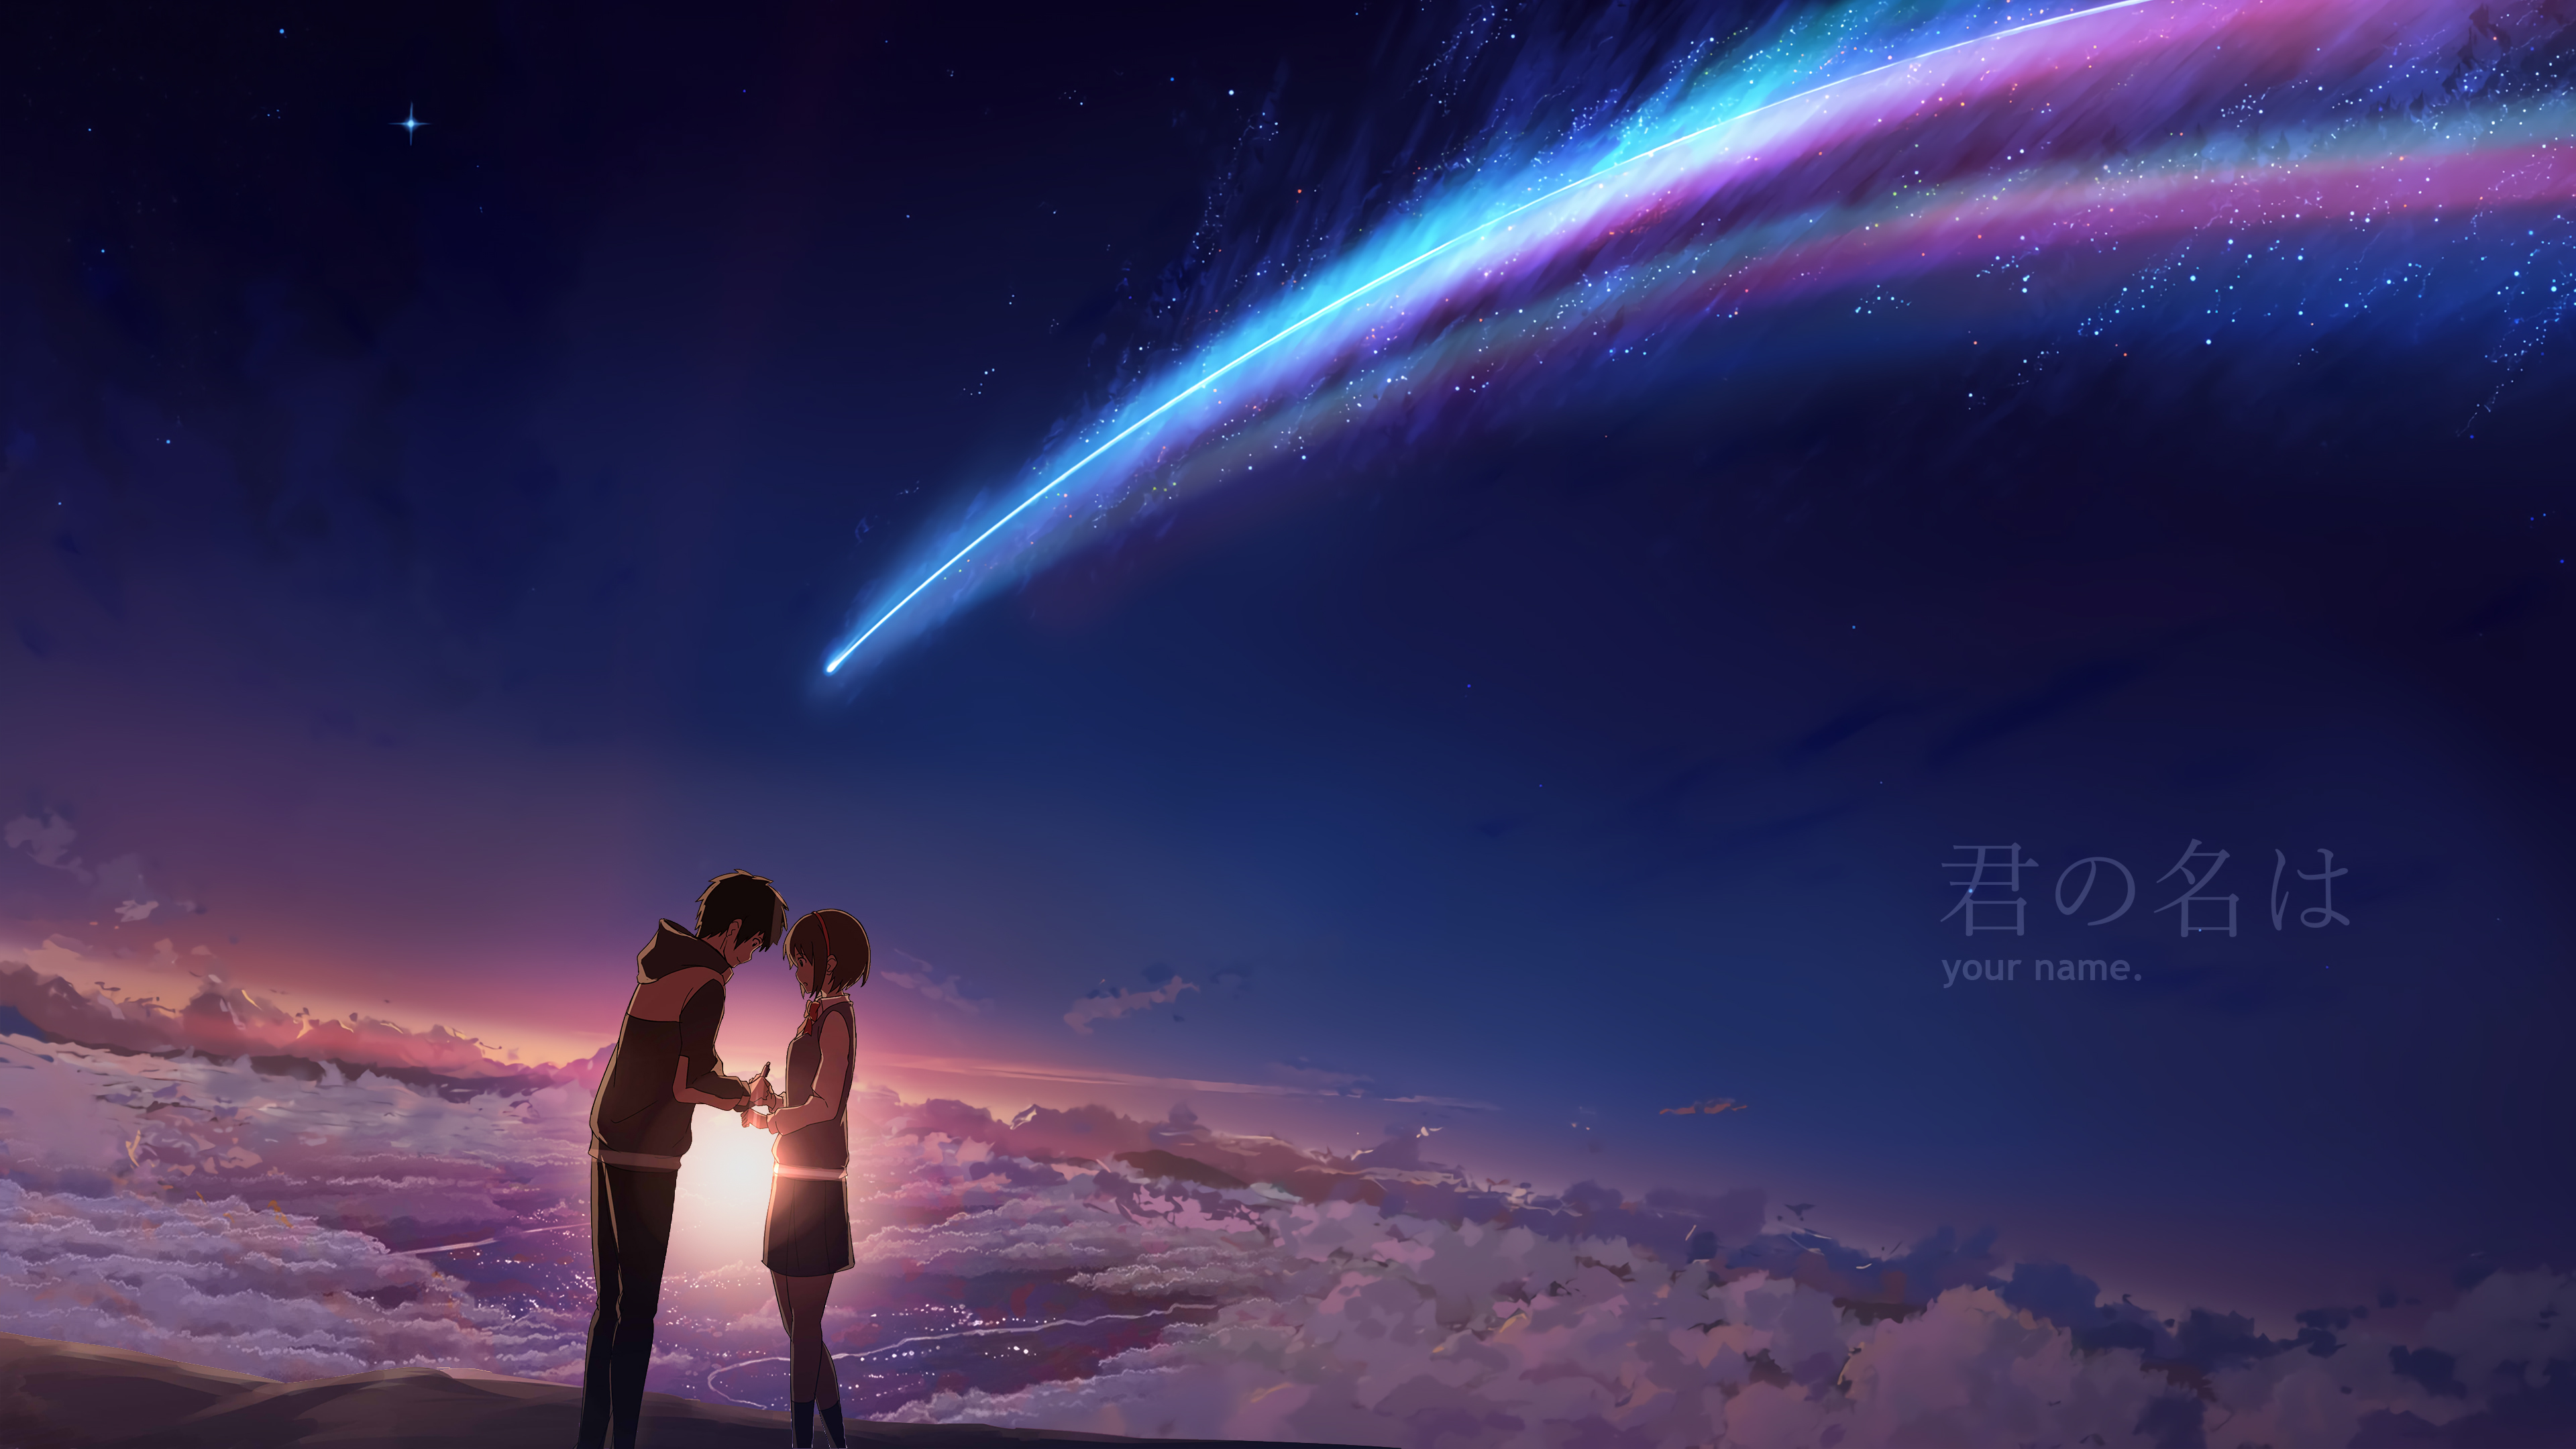 Anime Your Name. 4k Ultra HD Wallpaper by AssassinWarrior